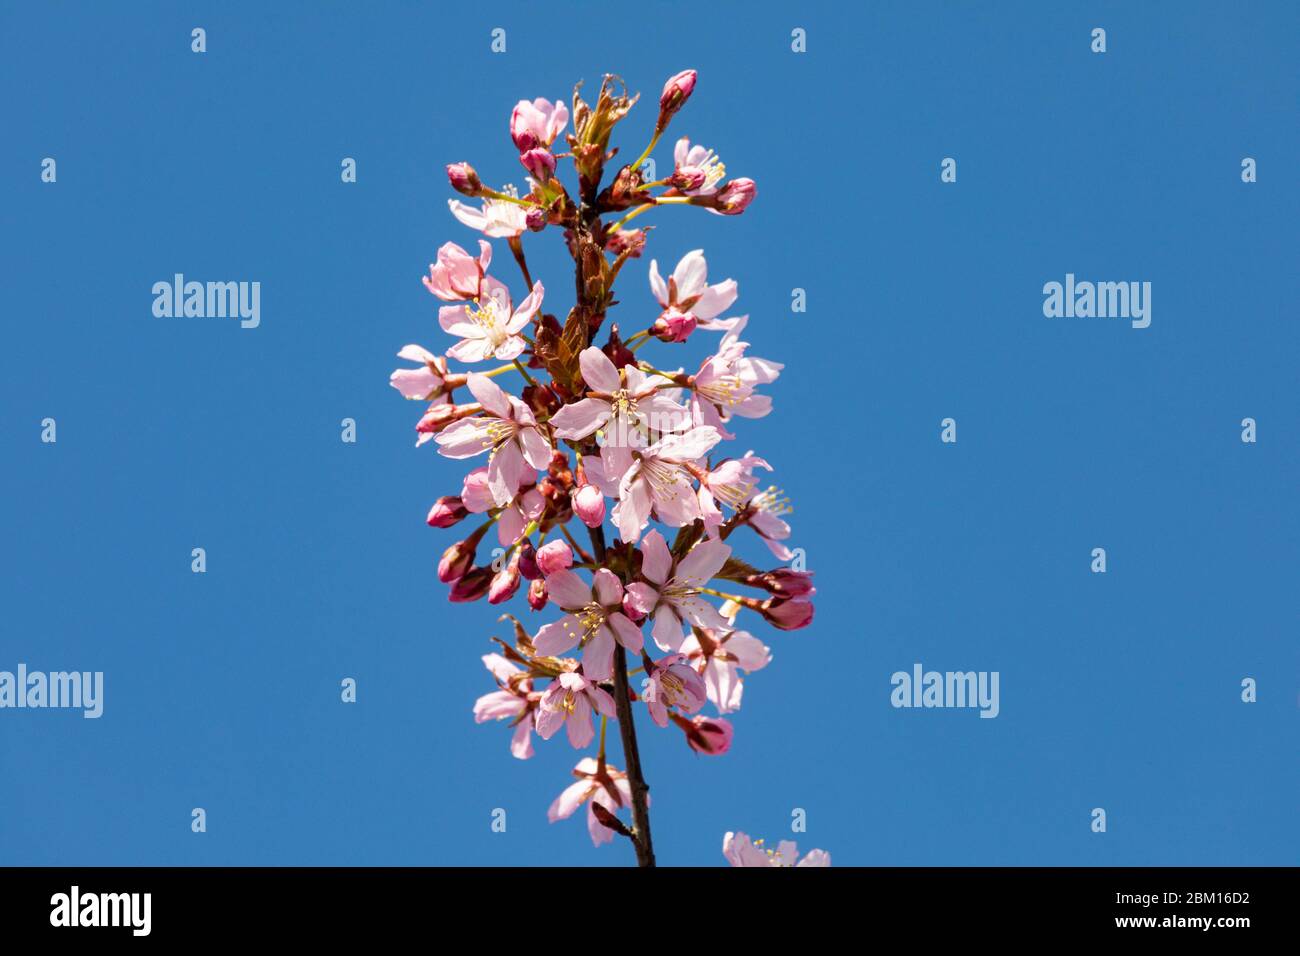 Cherry tree branch with pink blossoms against clear blue sky Stock Photo